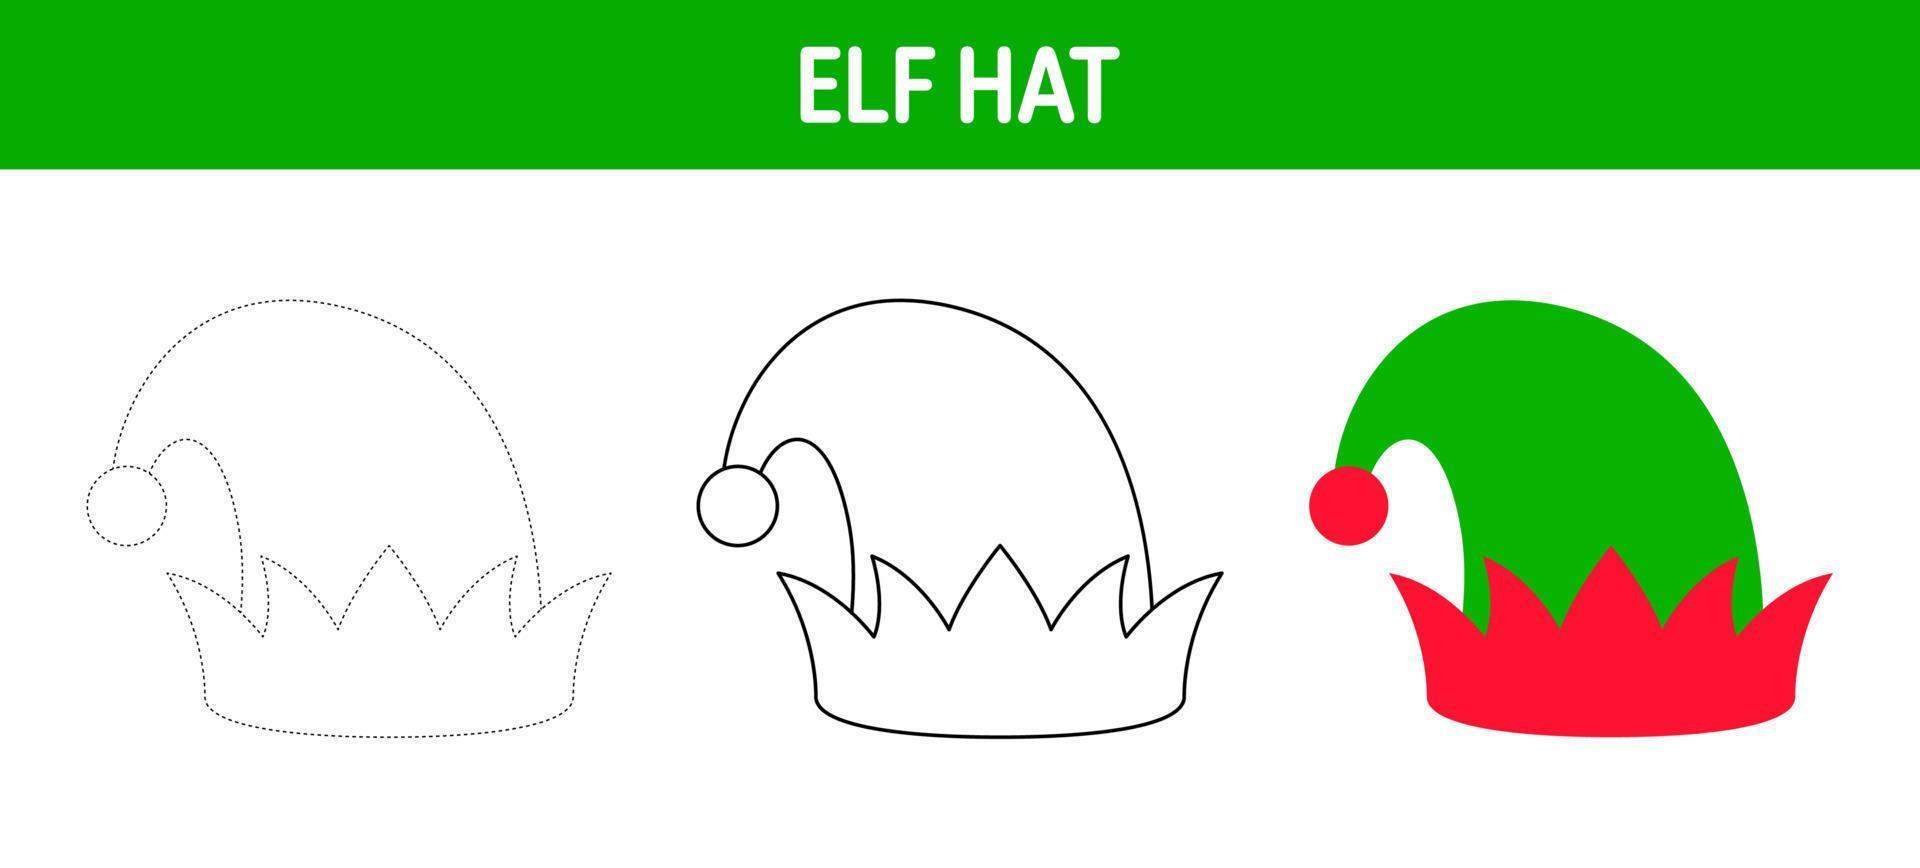 Elf Hat tracing and coloring worksheet for kids vector